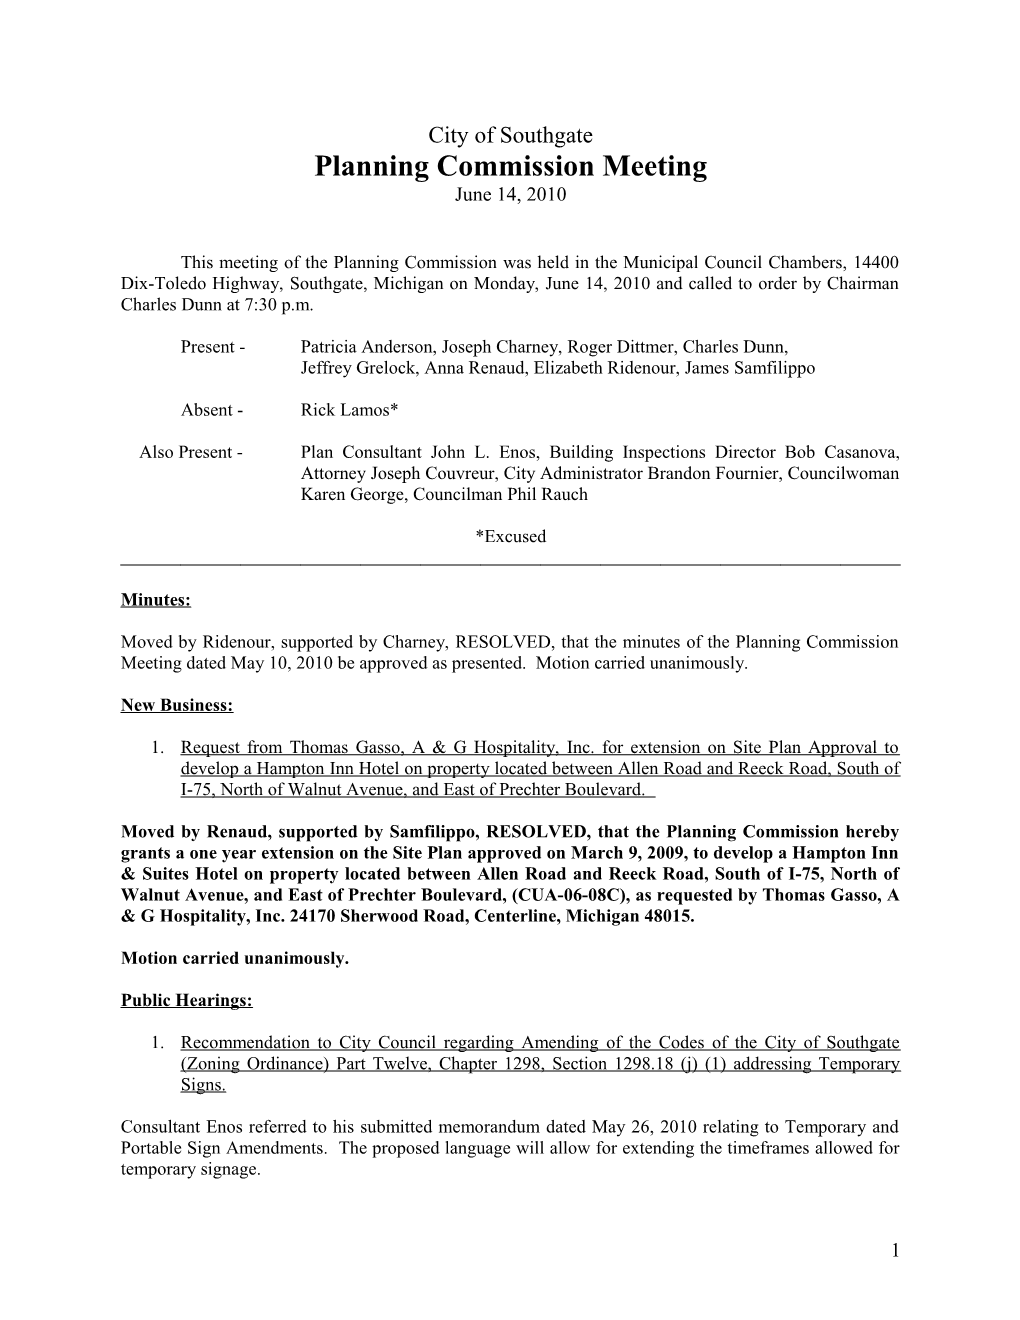 Planning Commission Meeting s2